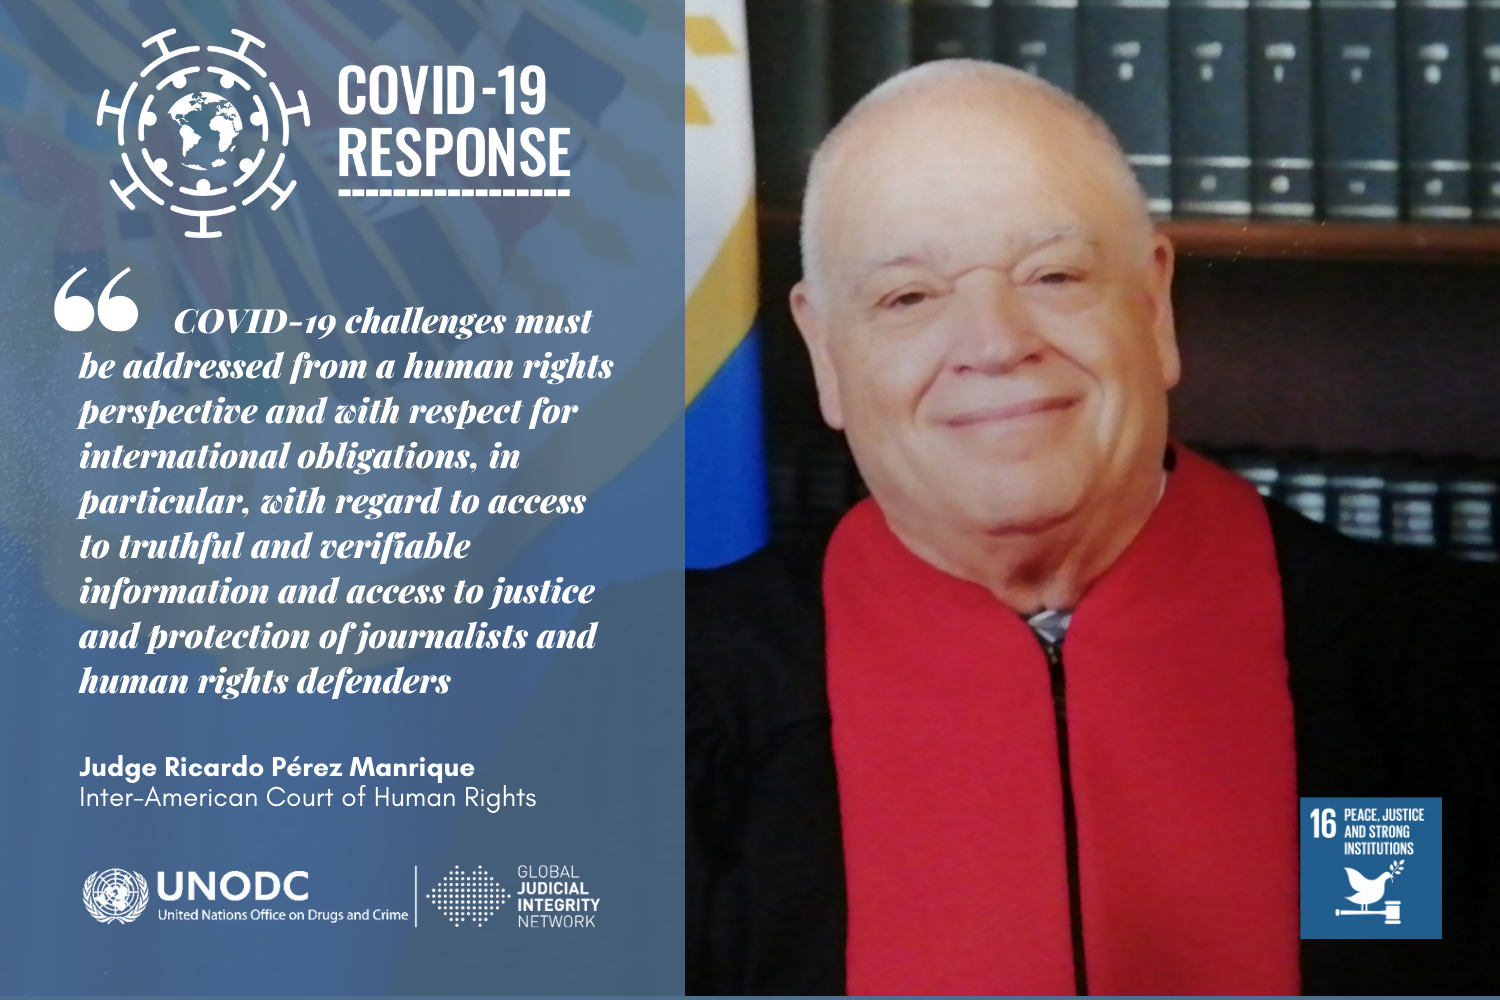 Access to Information and Justice in the Inter-American Court of Human Rights for the Defence of Human Rights during the Pandemic